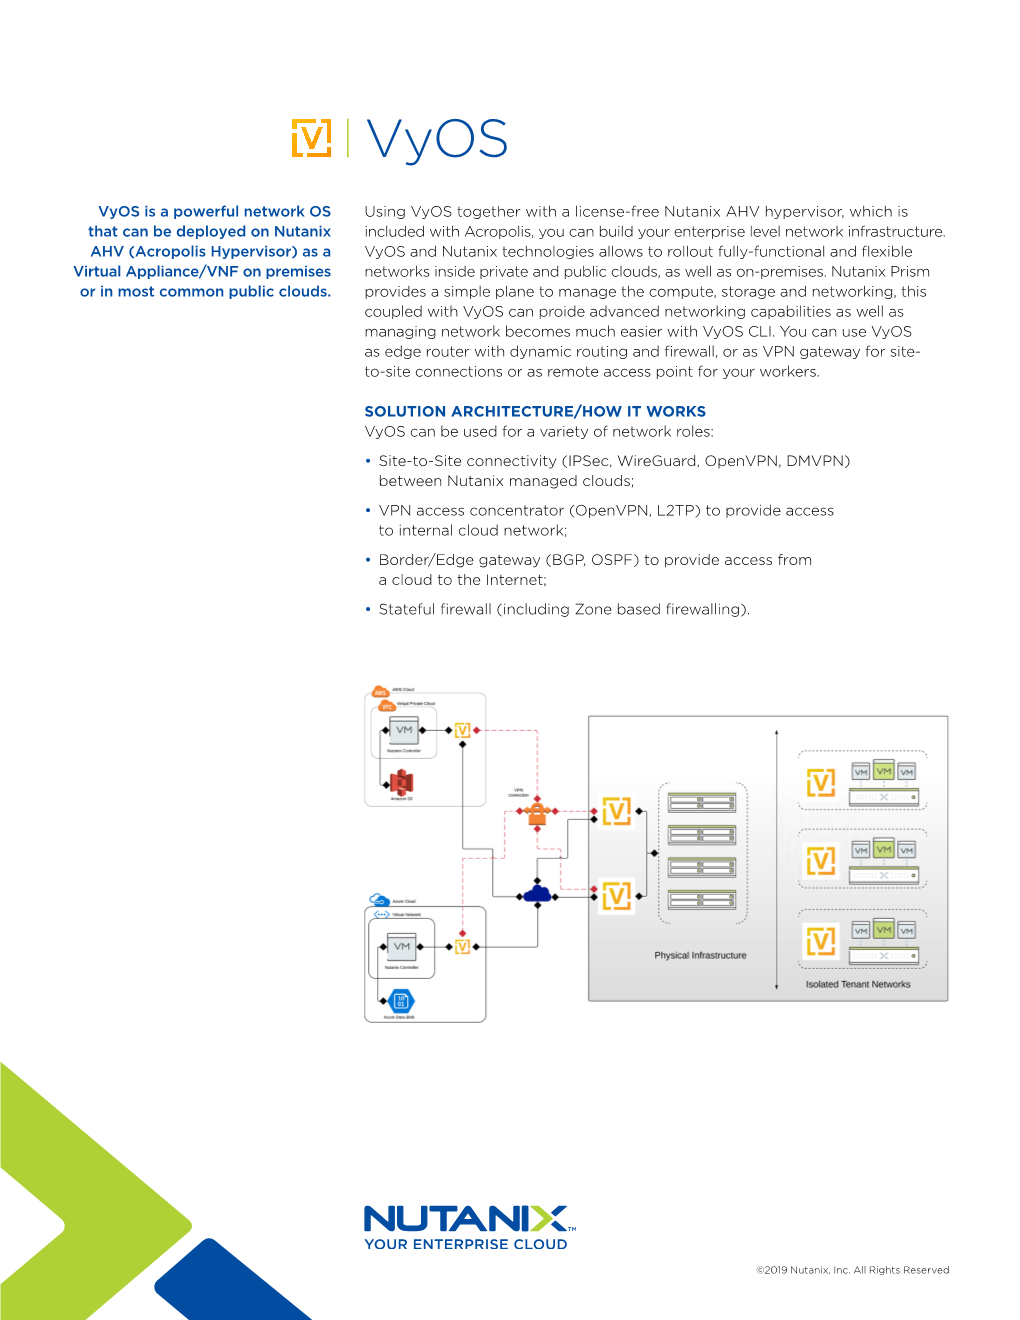 Vyos Is a Powerful Network OS That Can Be Deployed on Nutanix